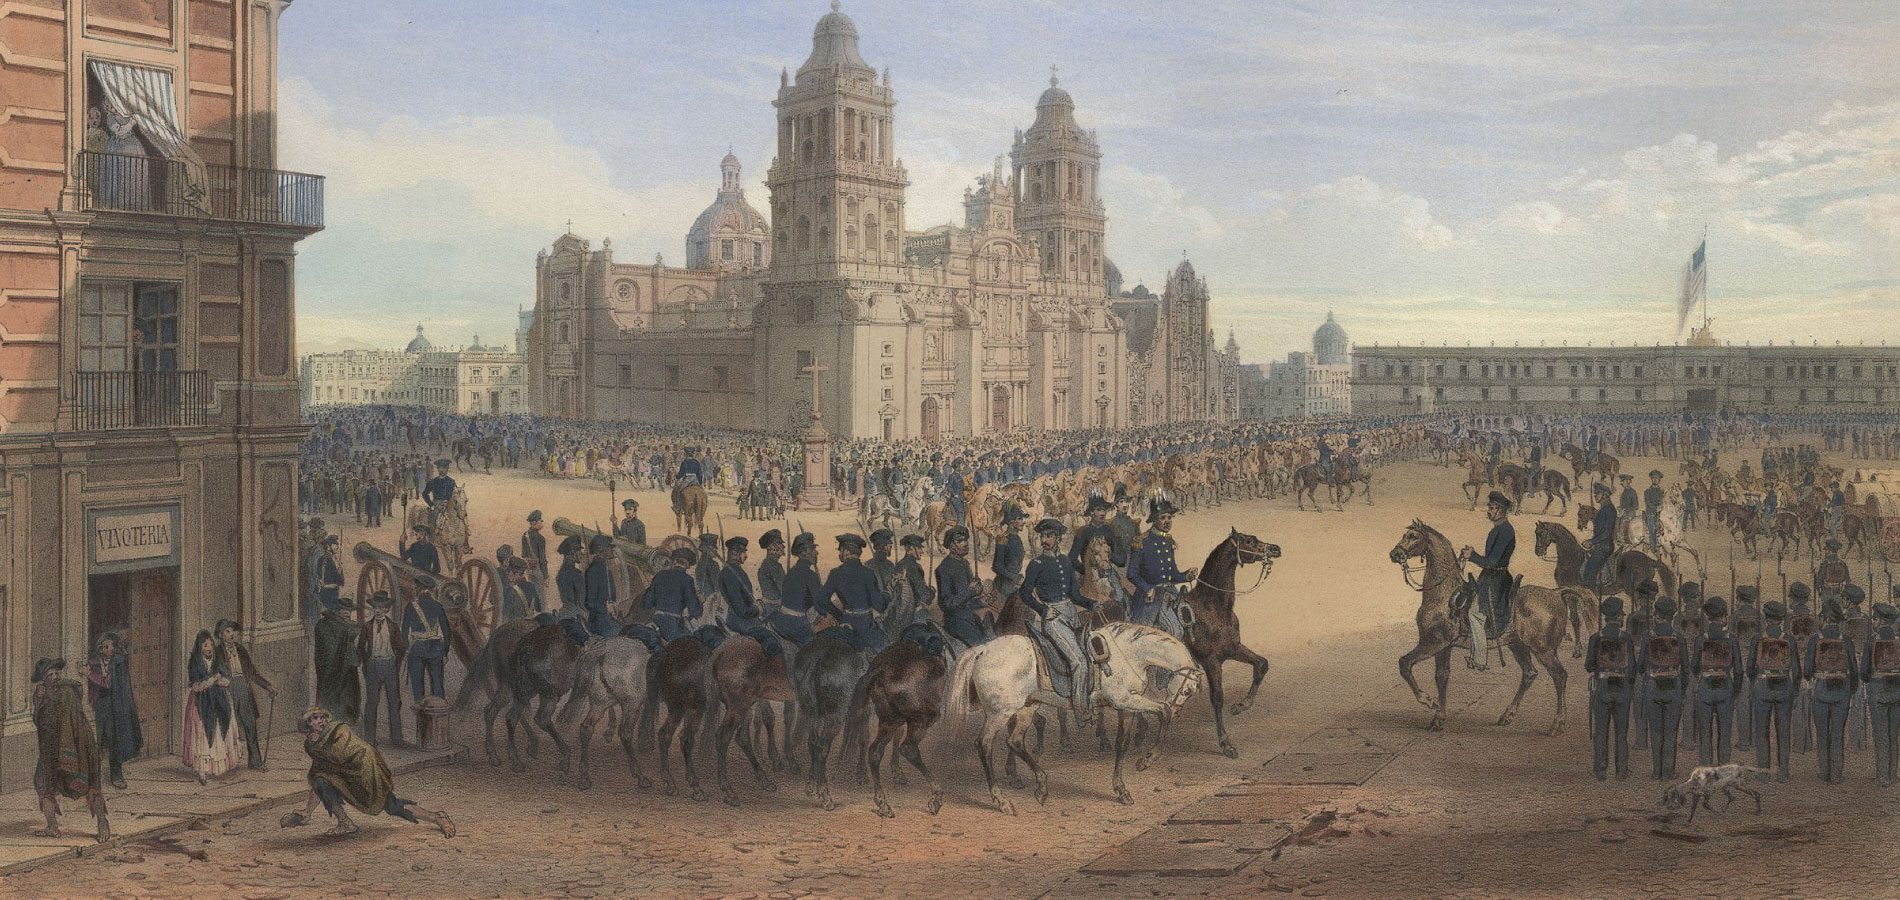 portrait of U.S. Army occupation of Mexico City in 1847